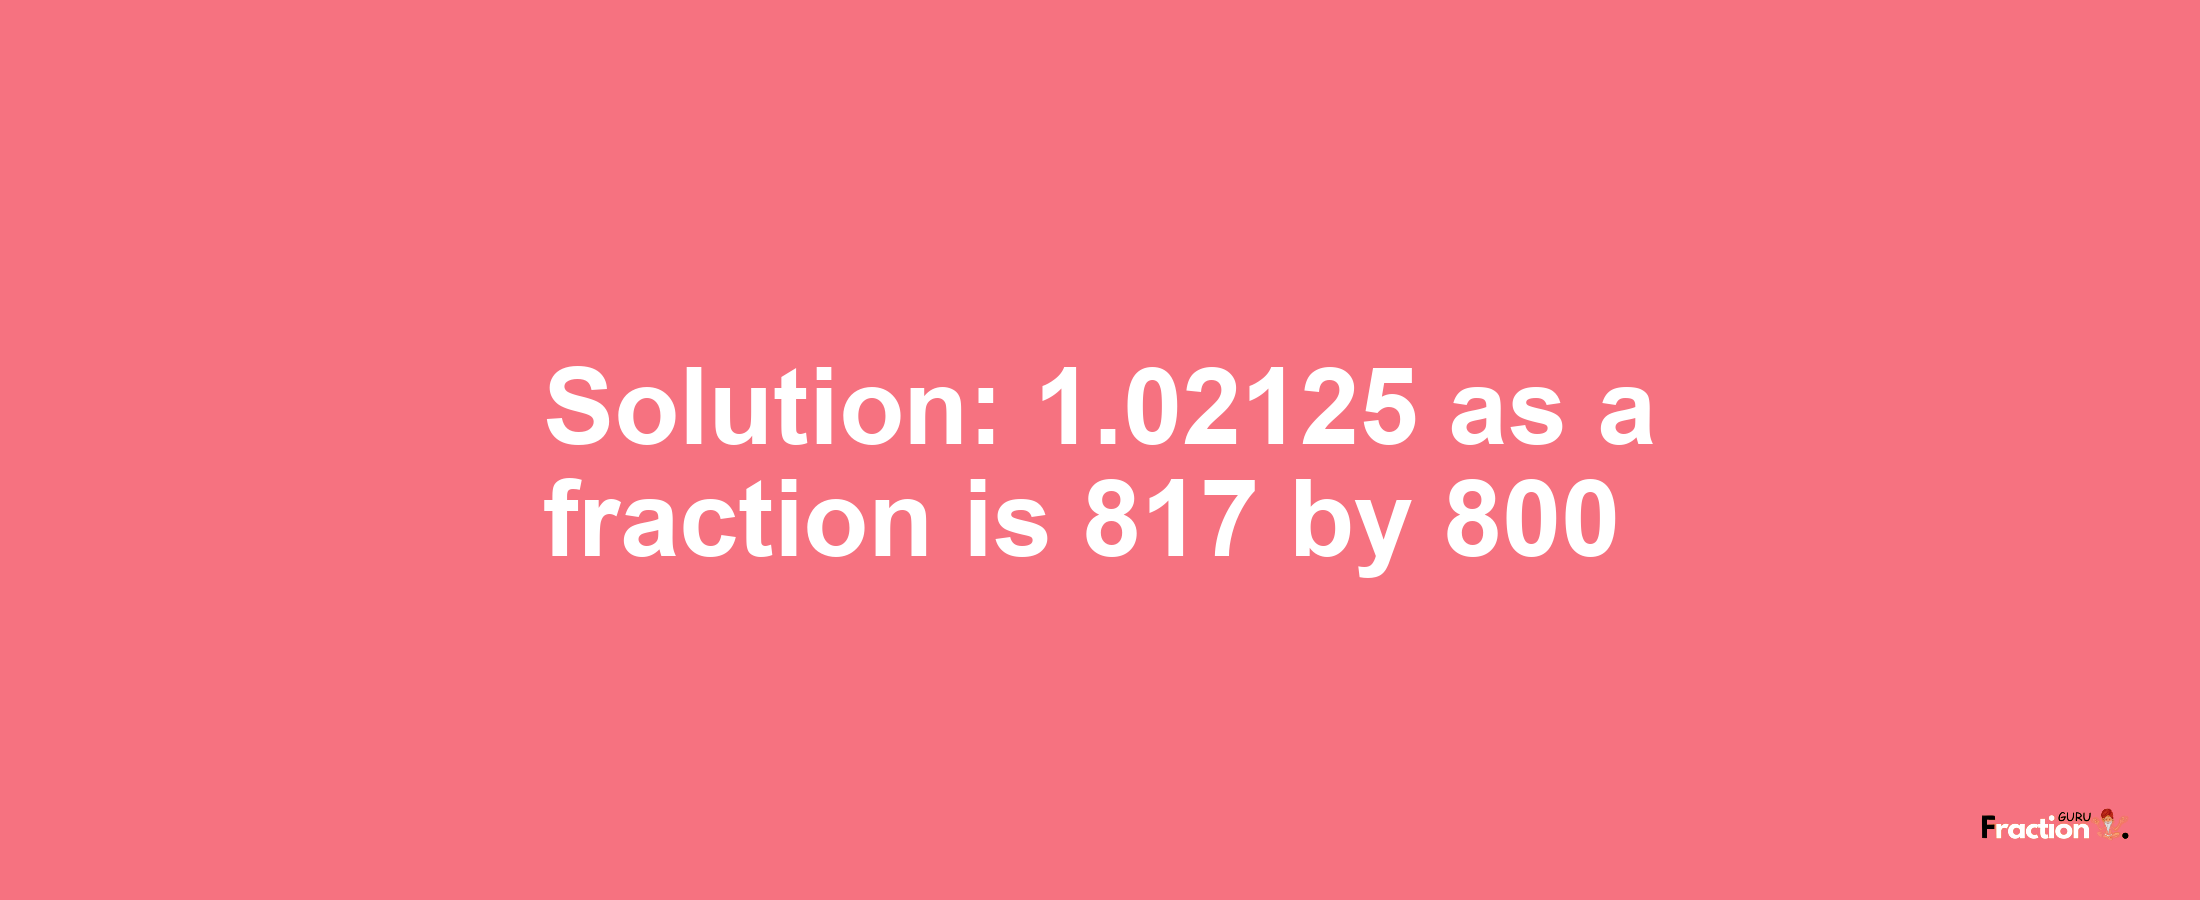 Solution:1.02125 as a fraction is 817/800